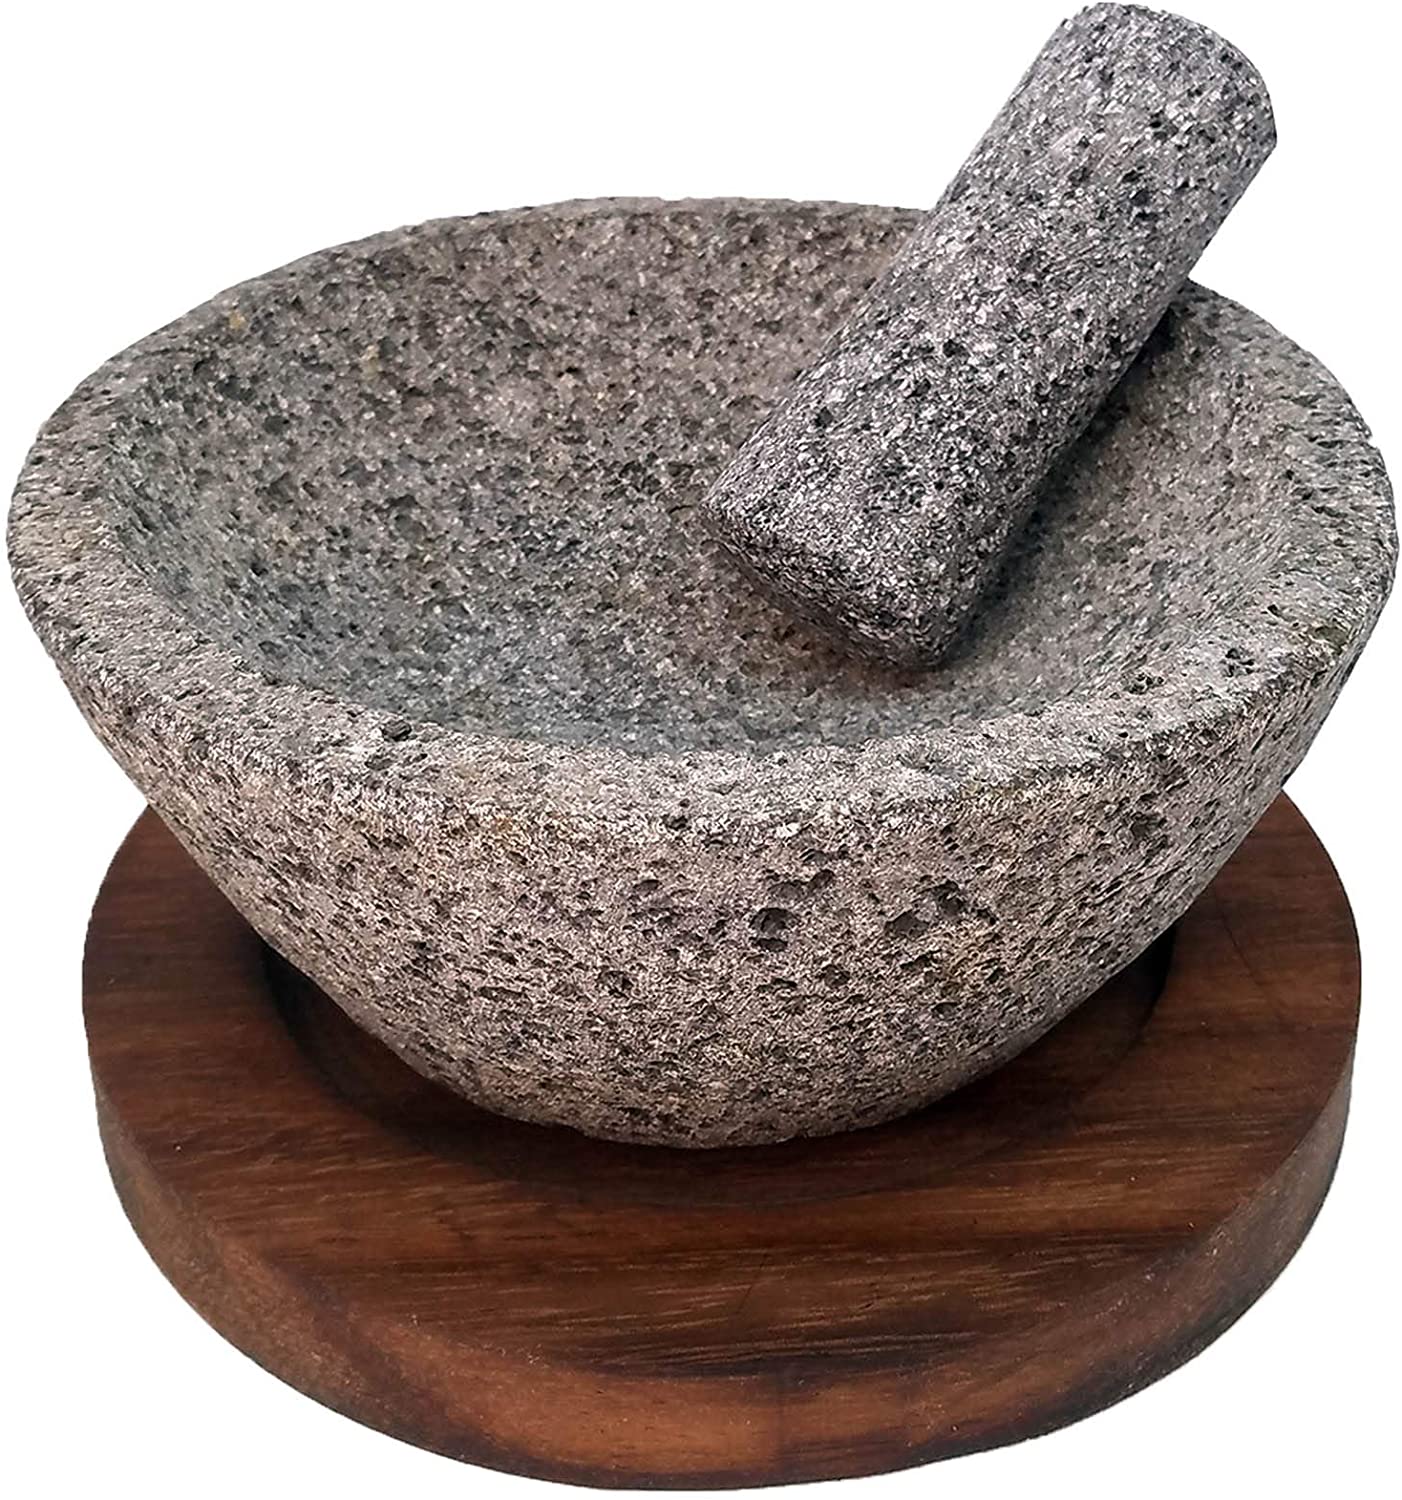 PRODUCTOS DE PIEDRA VOLCANICA / Round 7'' Mortar and Pestle Set with Parota Wood Serving Board / Treat your guests with delicious homemade salsas and guacamole! This beautifully crafted 7'' round mortar and pestle set is just right for you.